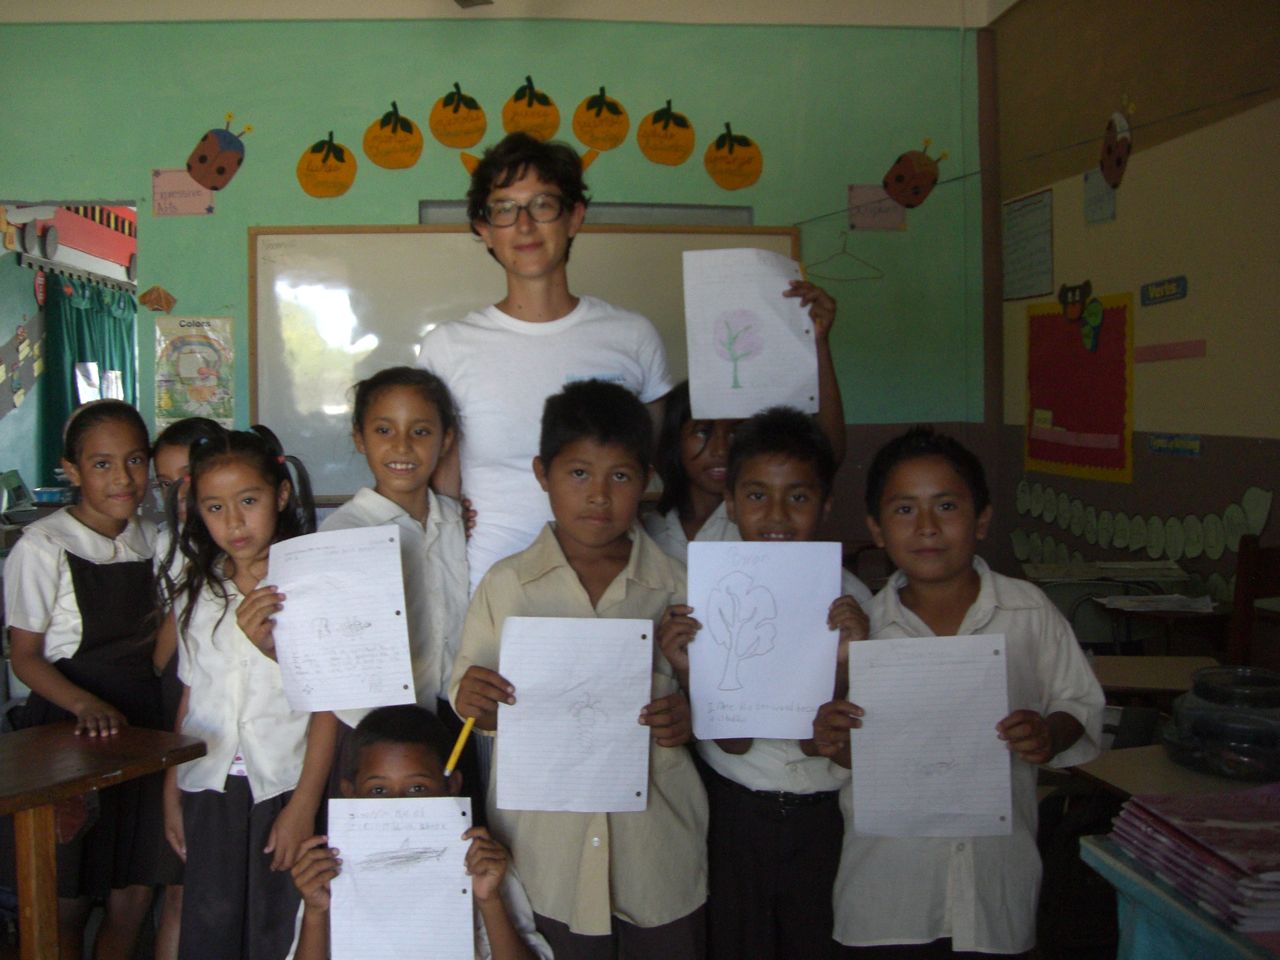 Nazarene school children proudly holding up their coral reef drawings